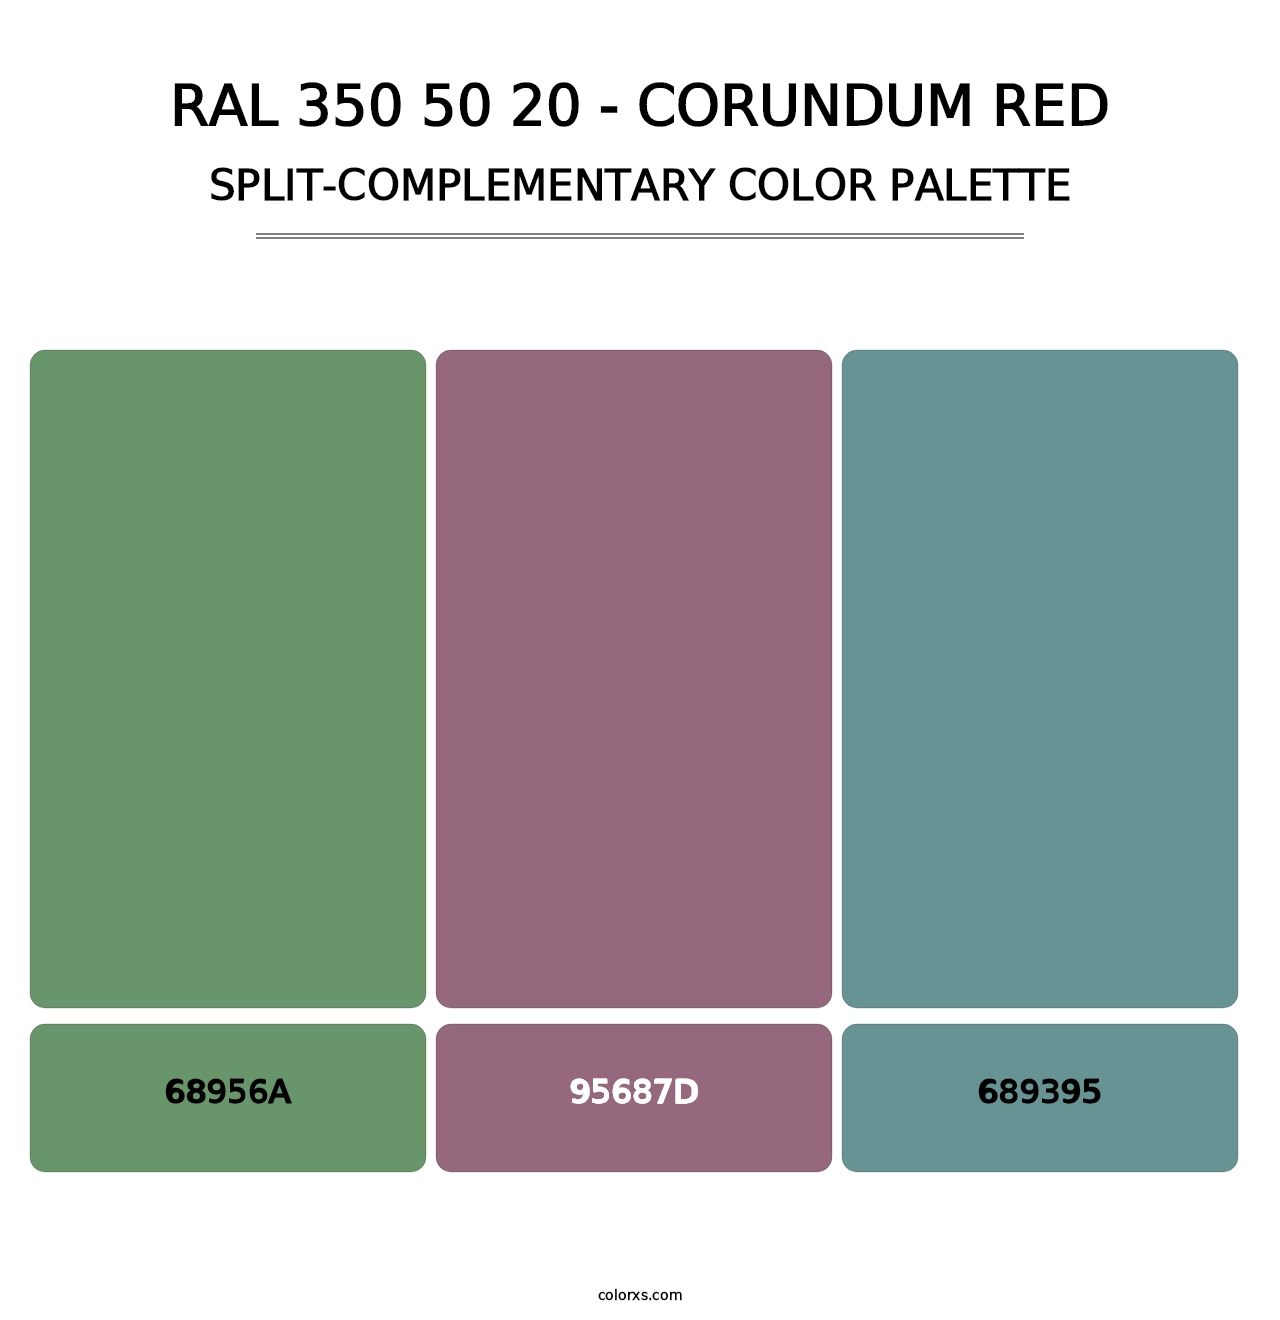 RAL 350 50 20 - Corundum Red - Split-Complementary Color Palette